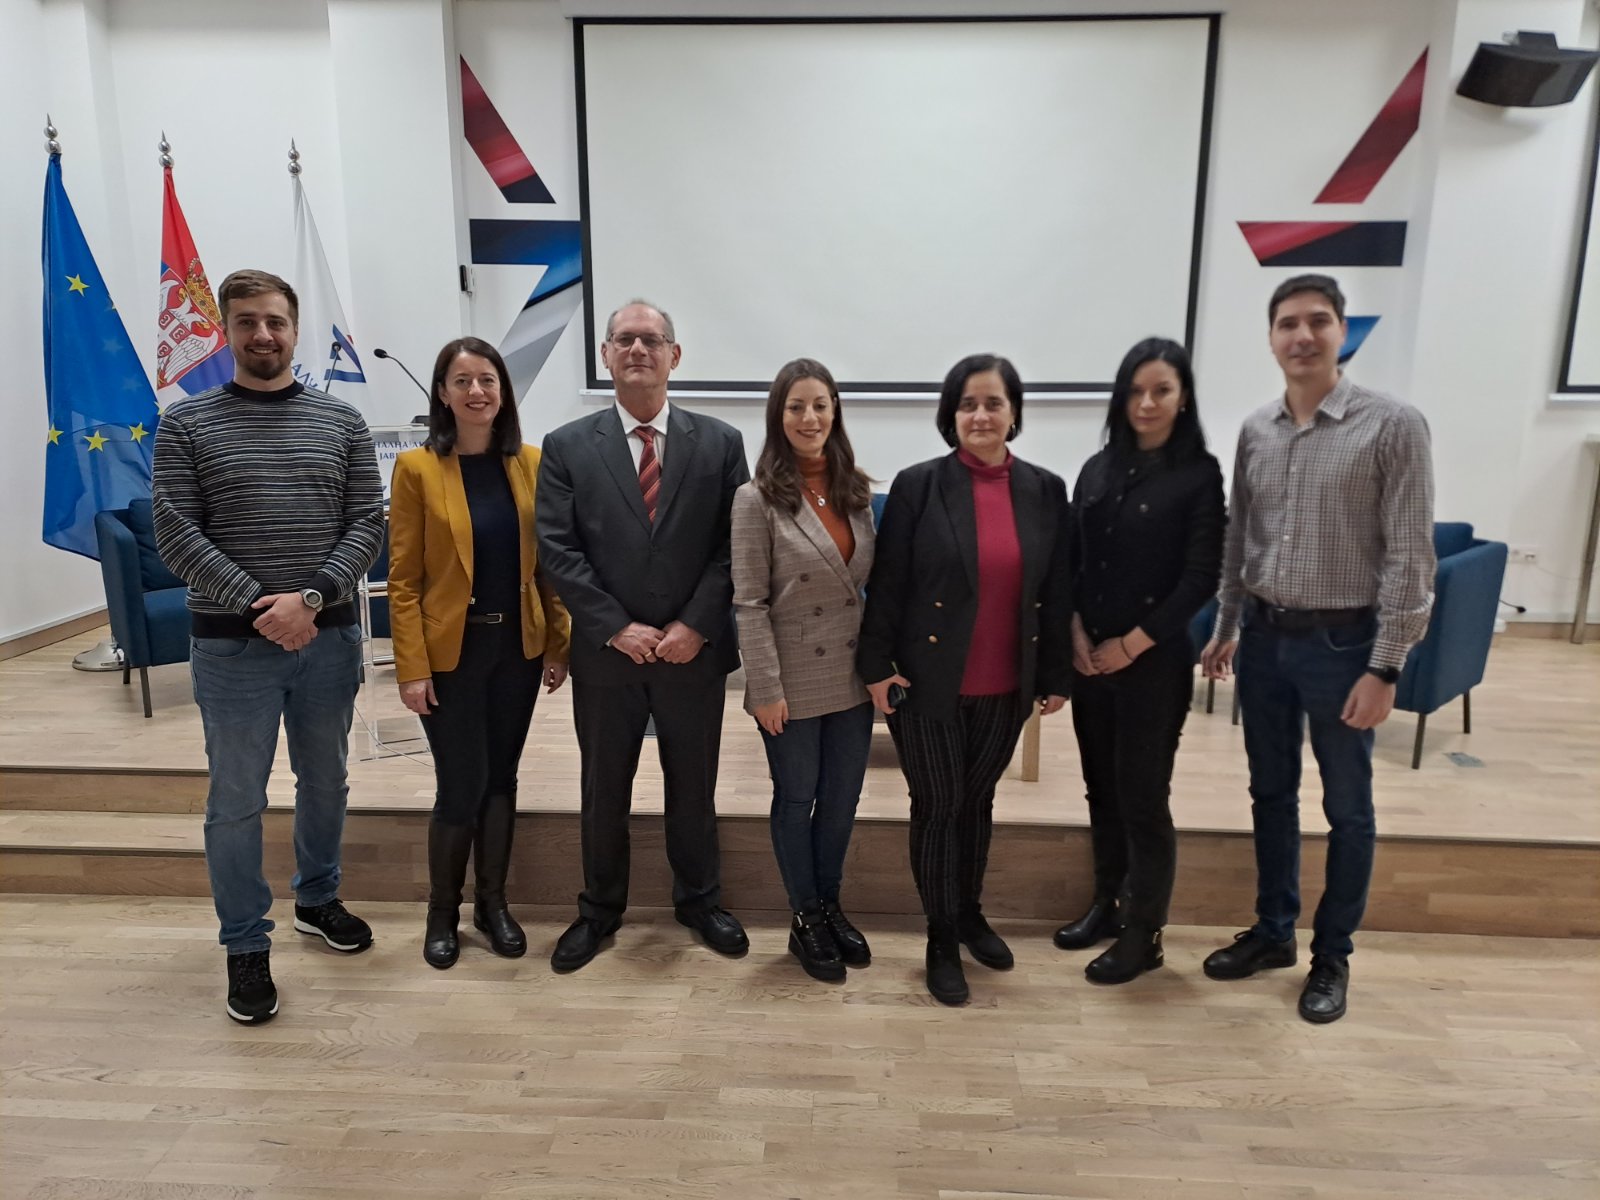 RETURN VISIT OF THE REPRESENTATIVES OF THE ROMANIAN INSTITUTE TO THE ACADEMY